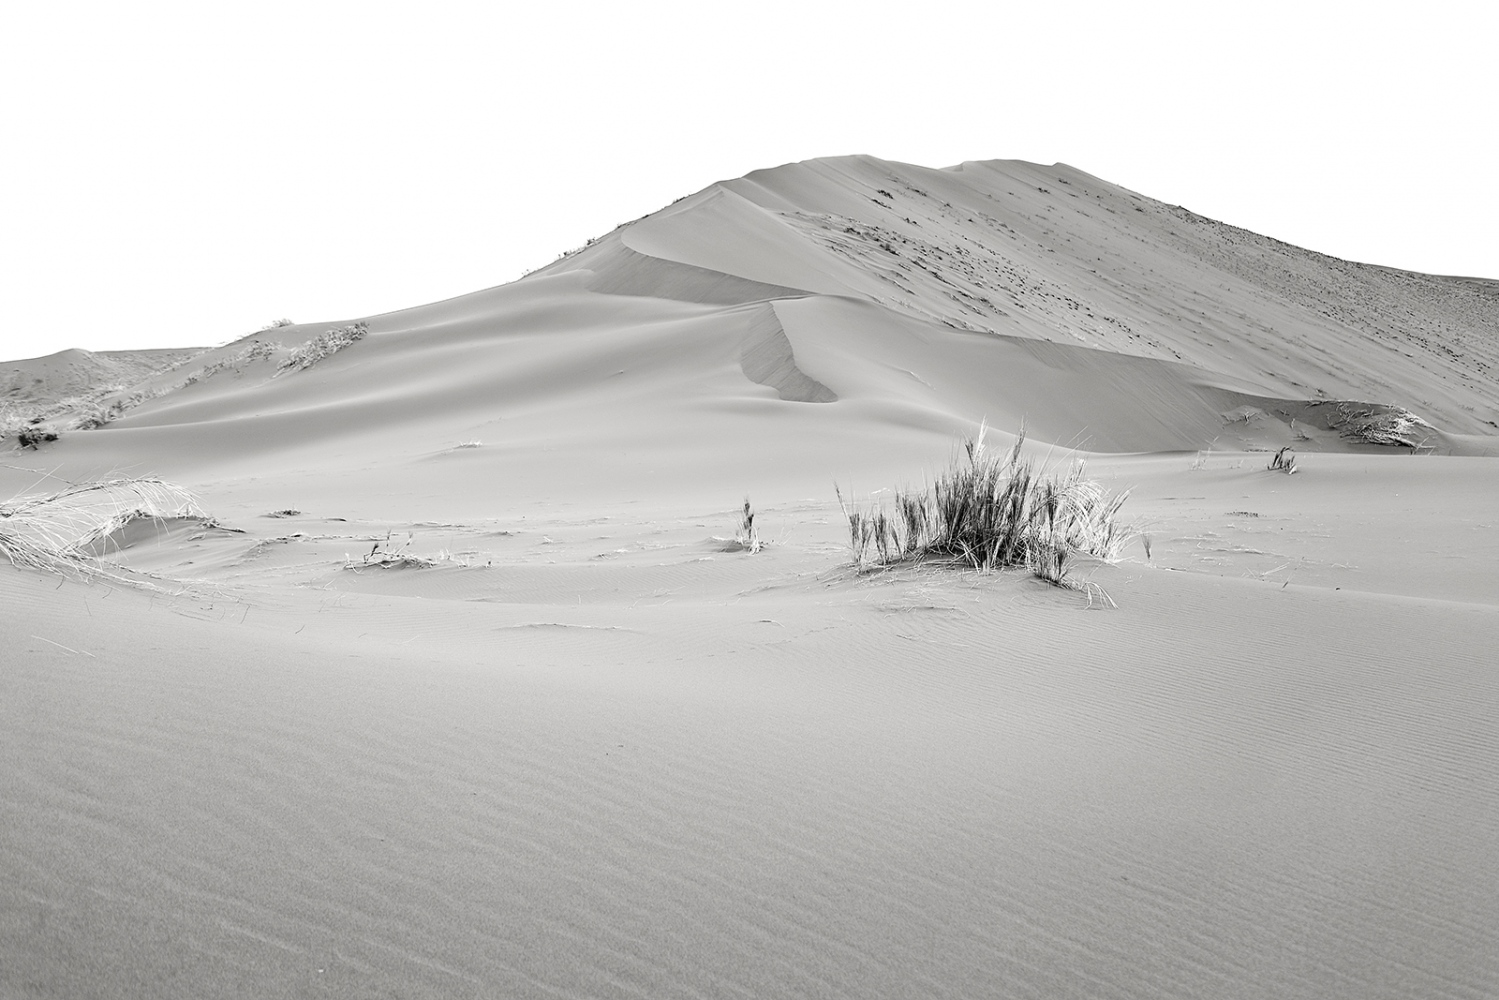 Image from Dunes. The surreal landscape